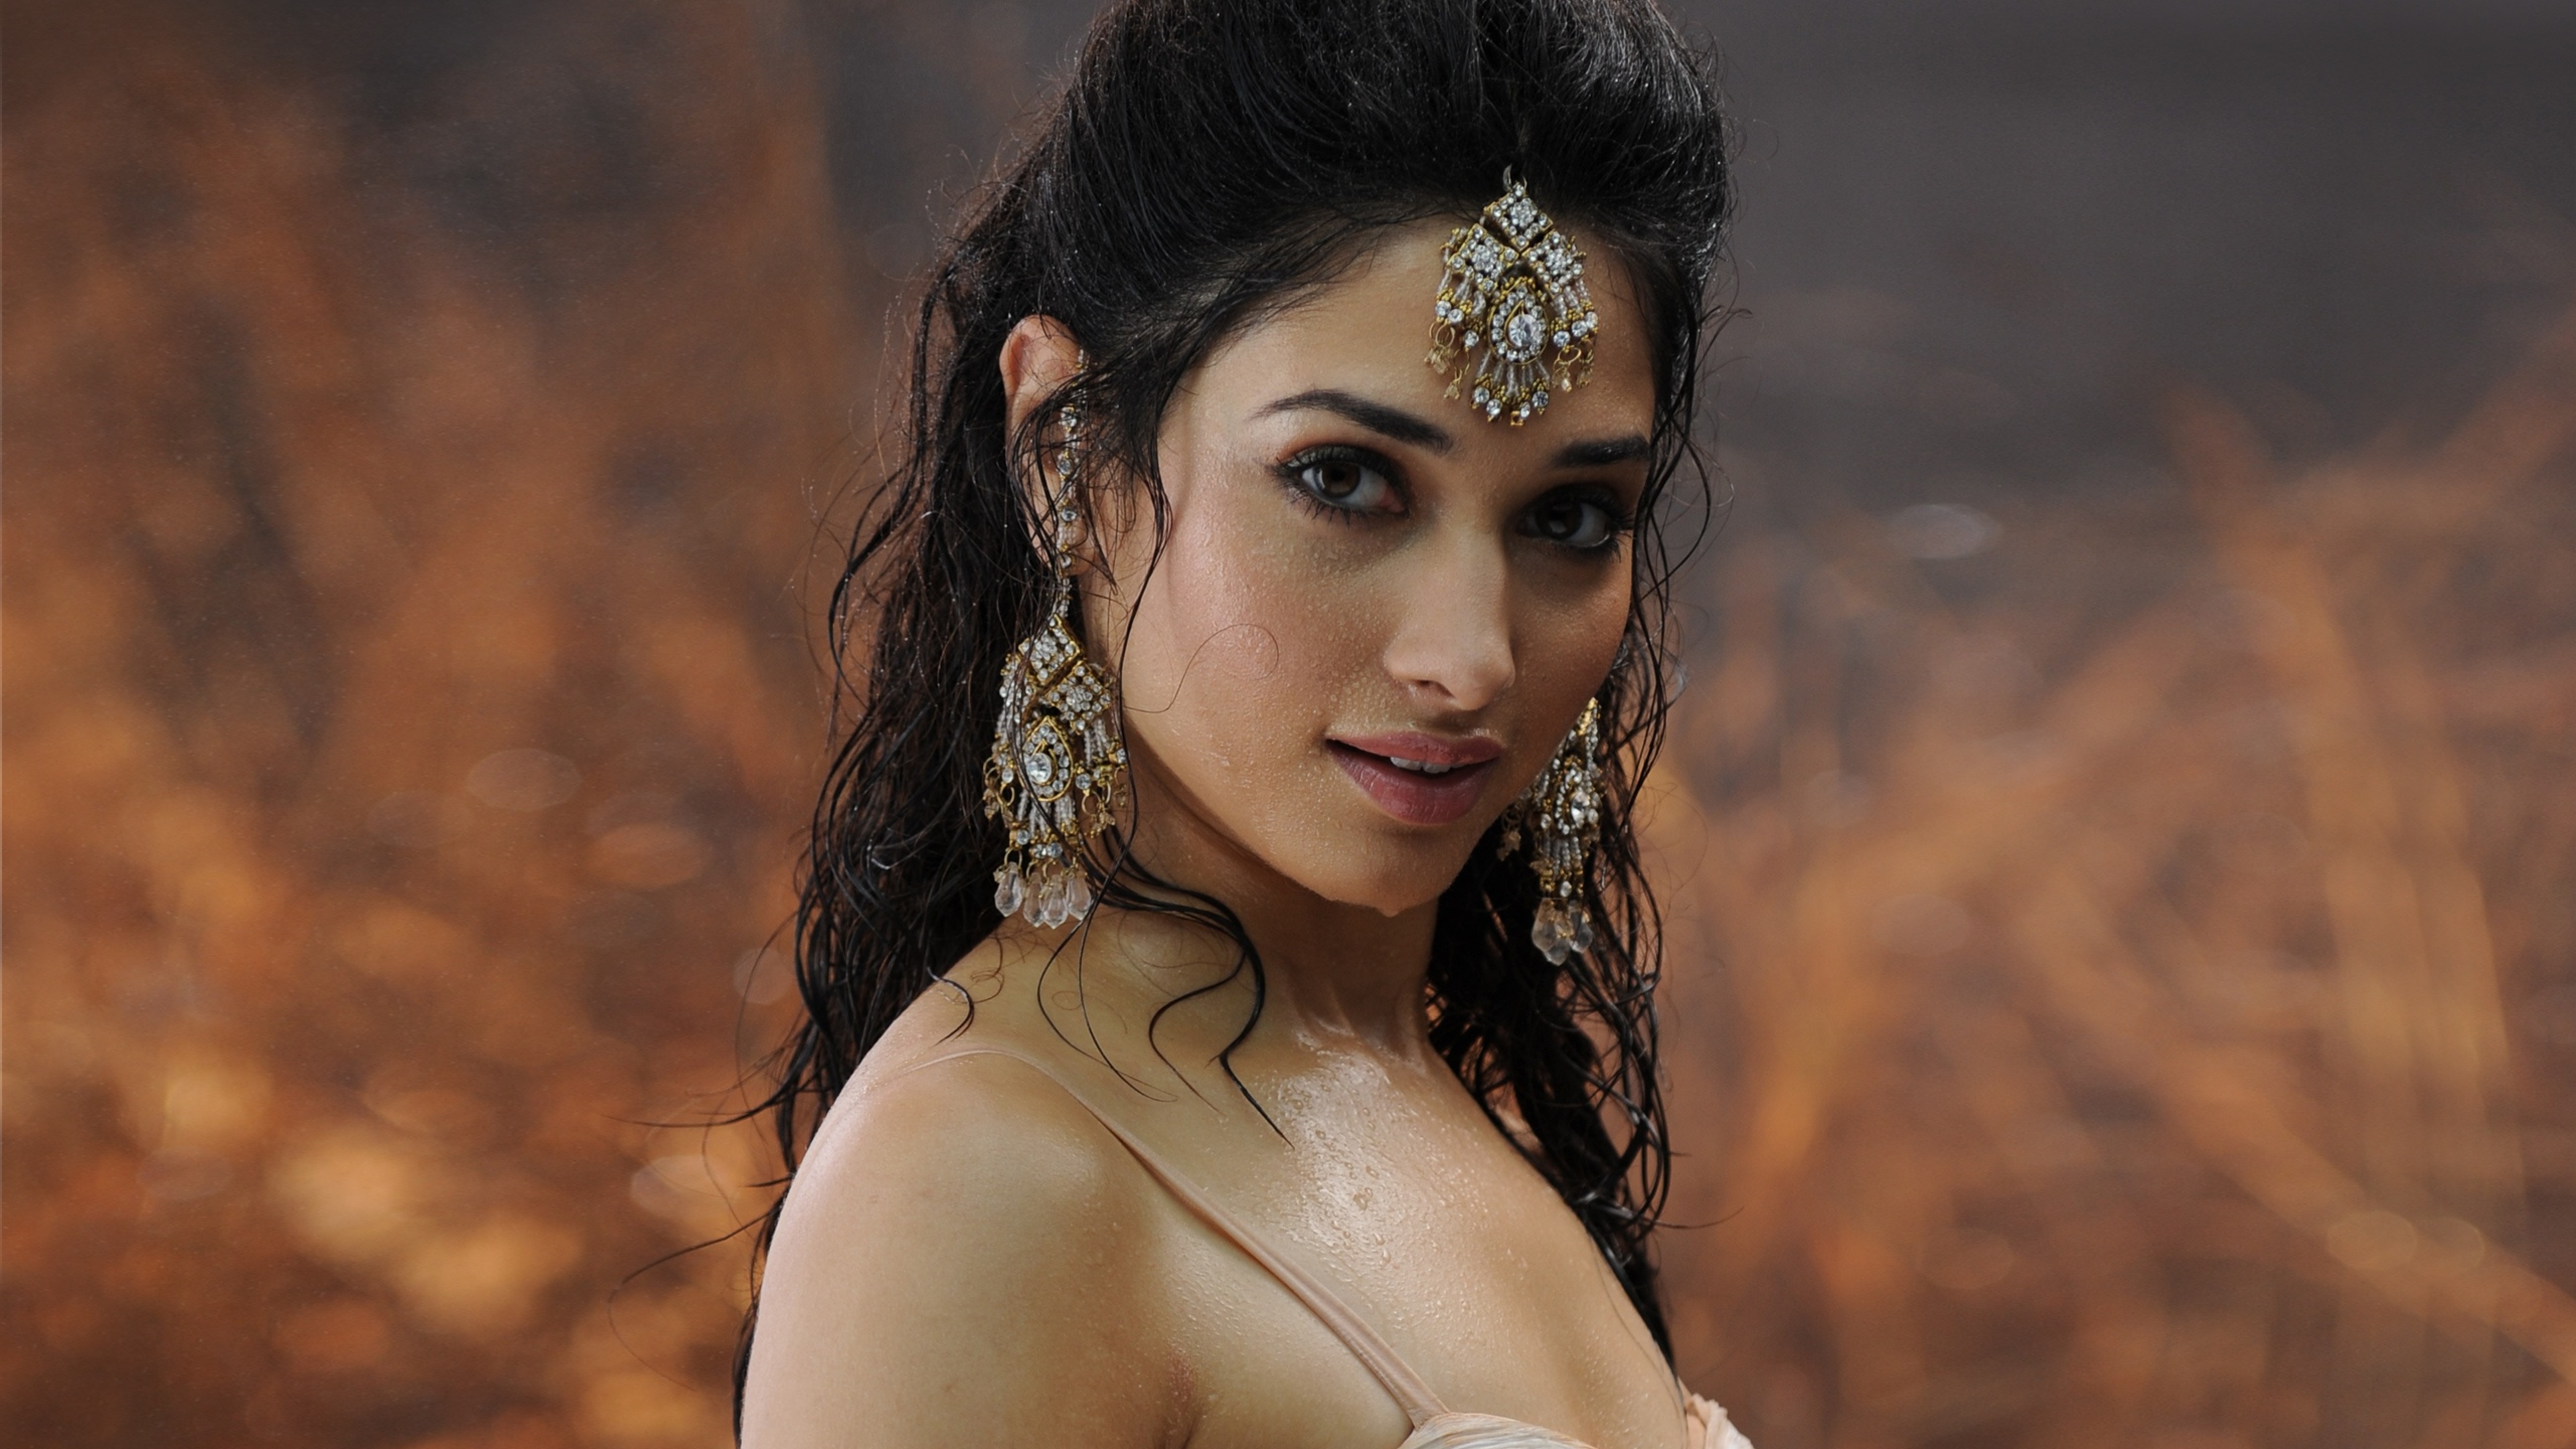 3840x2160 Tamanna Bhatia 4k HD 4k Wallpapers, Images, Backgrounds, Photos  and Pictures